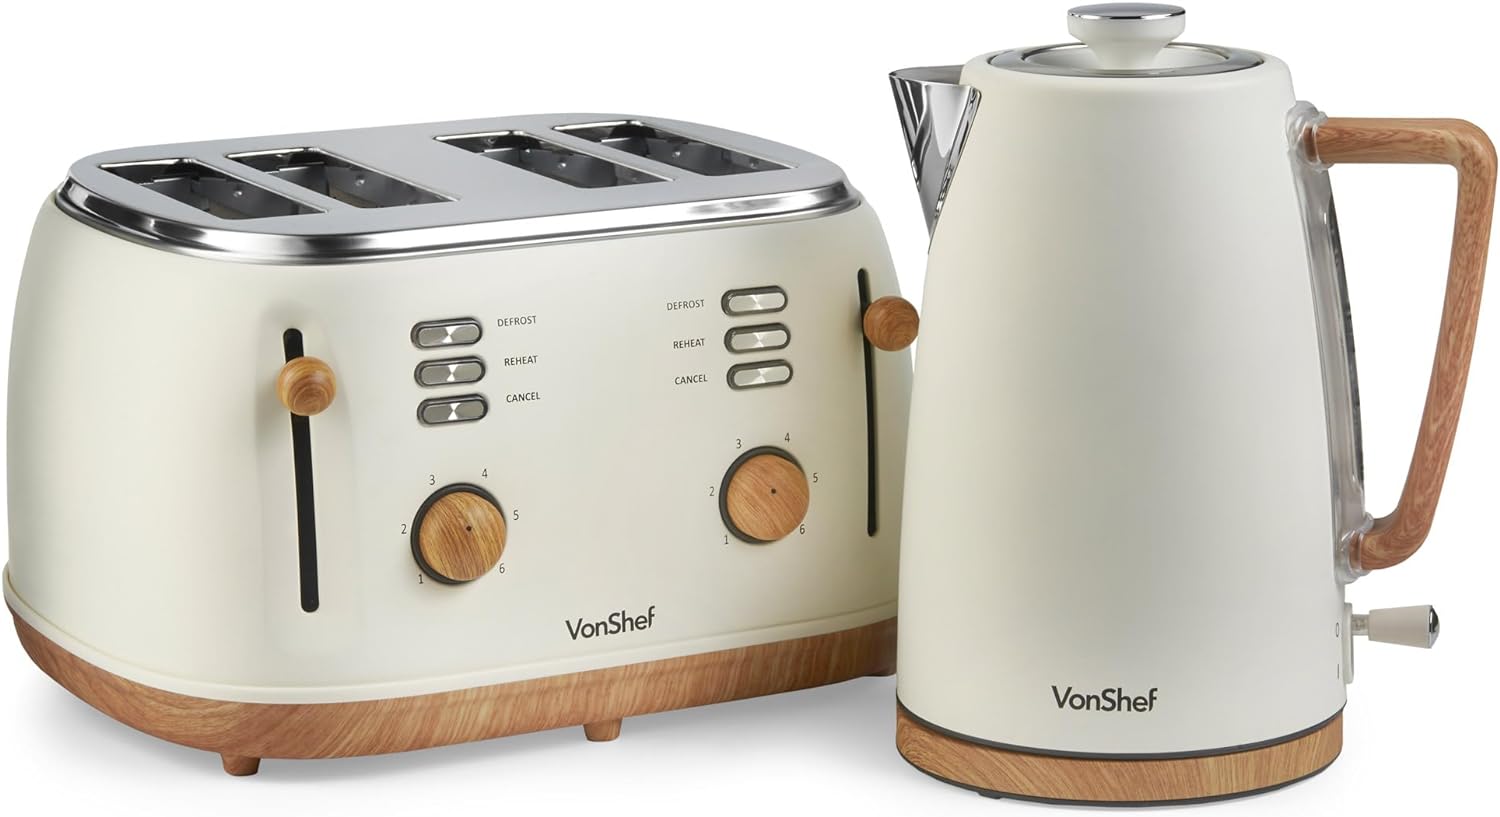 VonShef Kettle and Toaster Set – Scandi 1.7L Rapid Boil Kettle 3000W & 2 Slice Wide Slot Toaster 850W with 6 Browning Controls, Matching Kitchen Set – Nordic Cream and Wood Accents - Fika Range - Amazing Gadgets Outlet